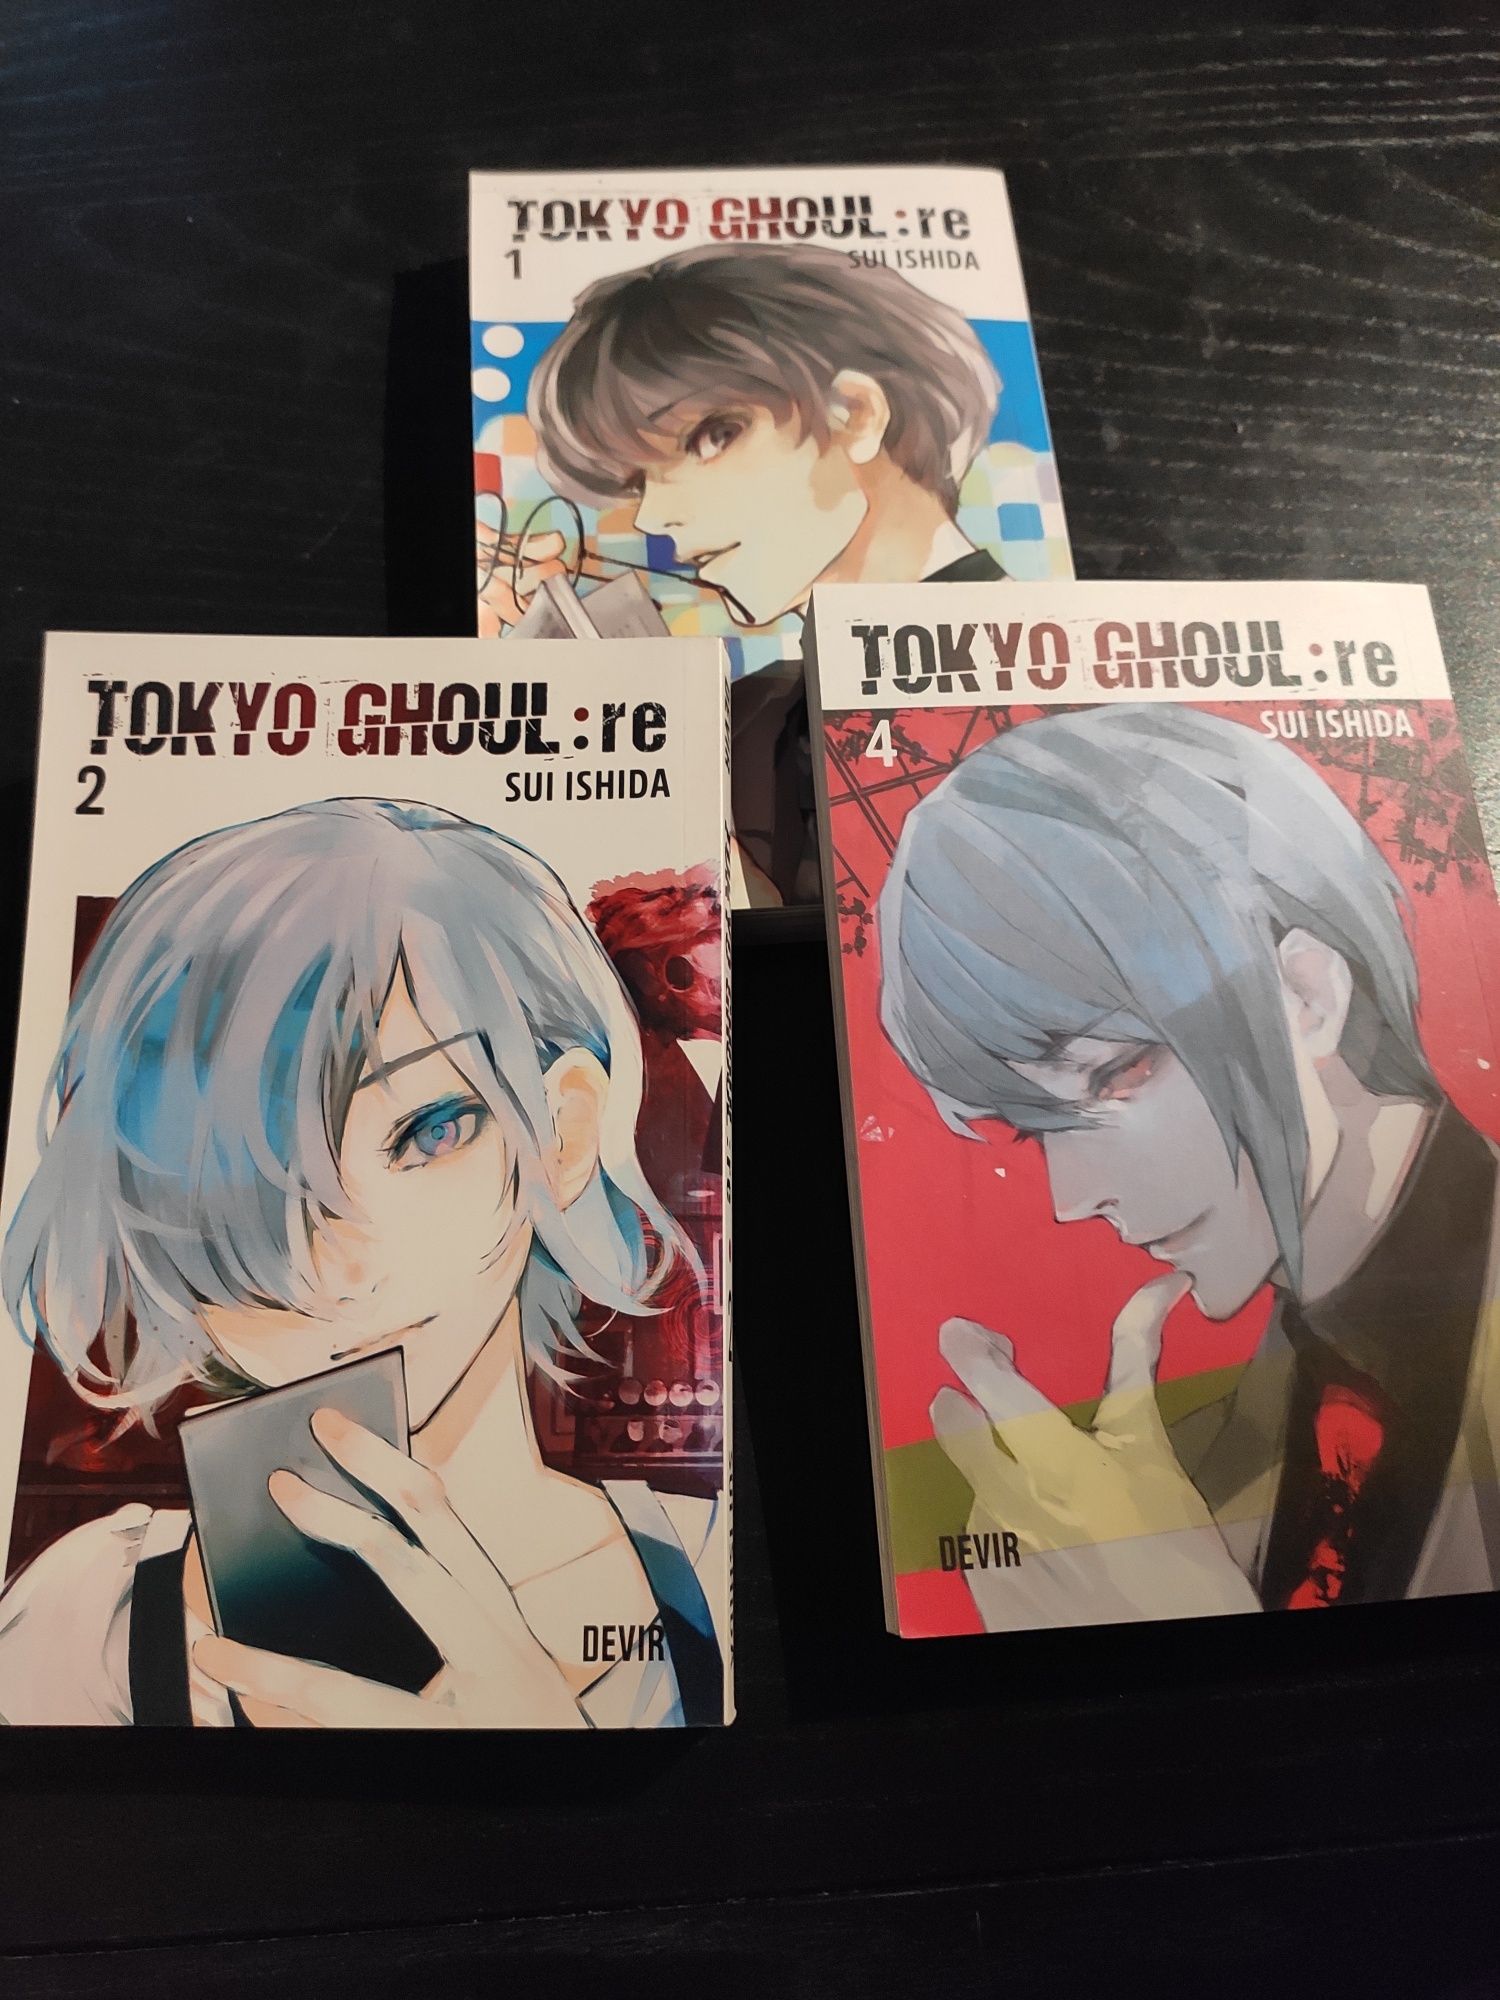 Tokyo Ghoul : RE 1, 2 e 4